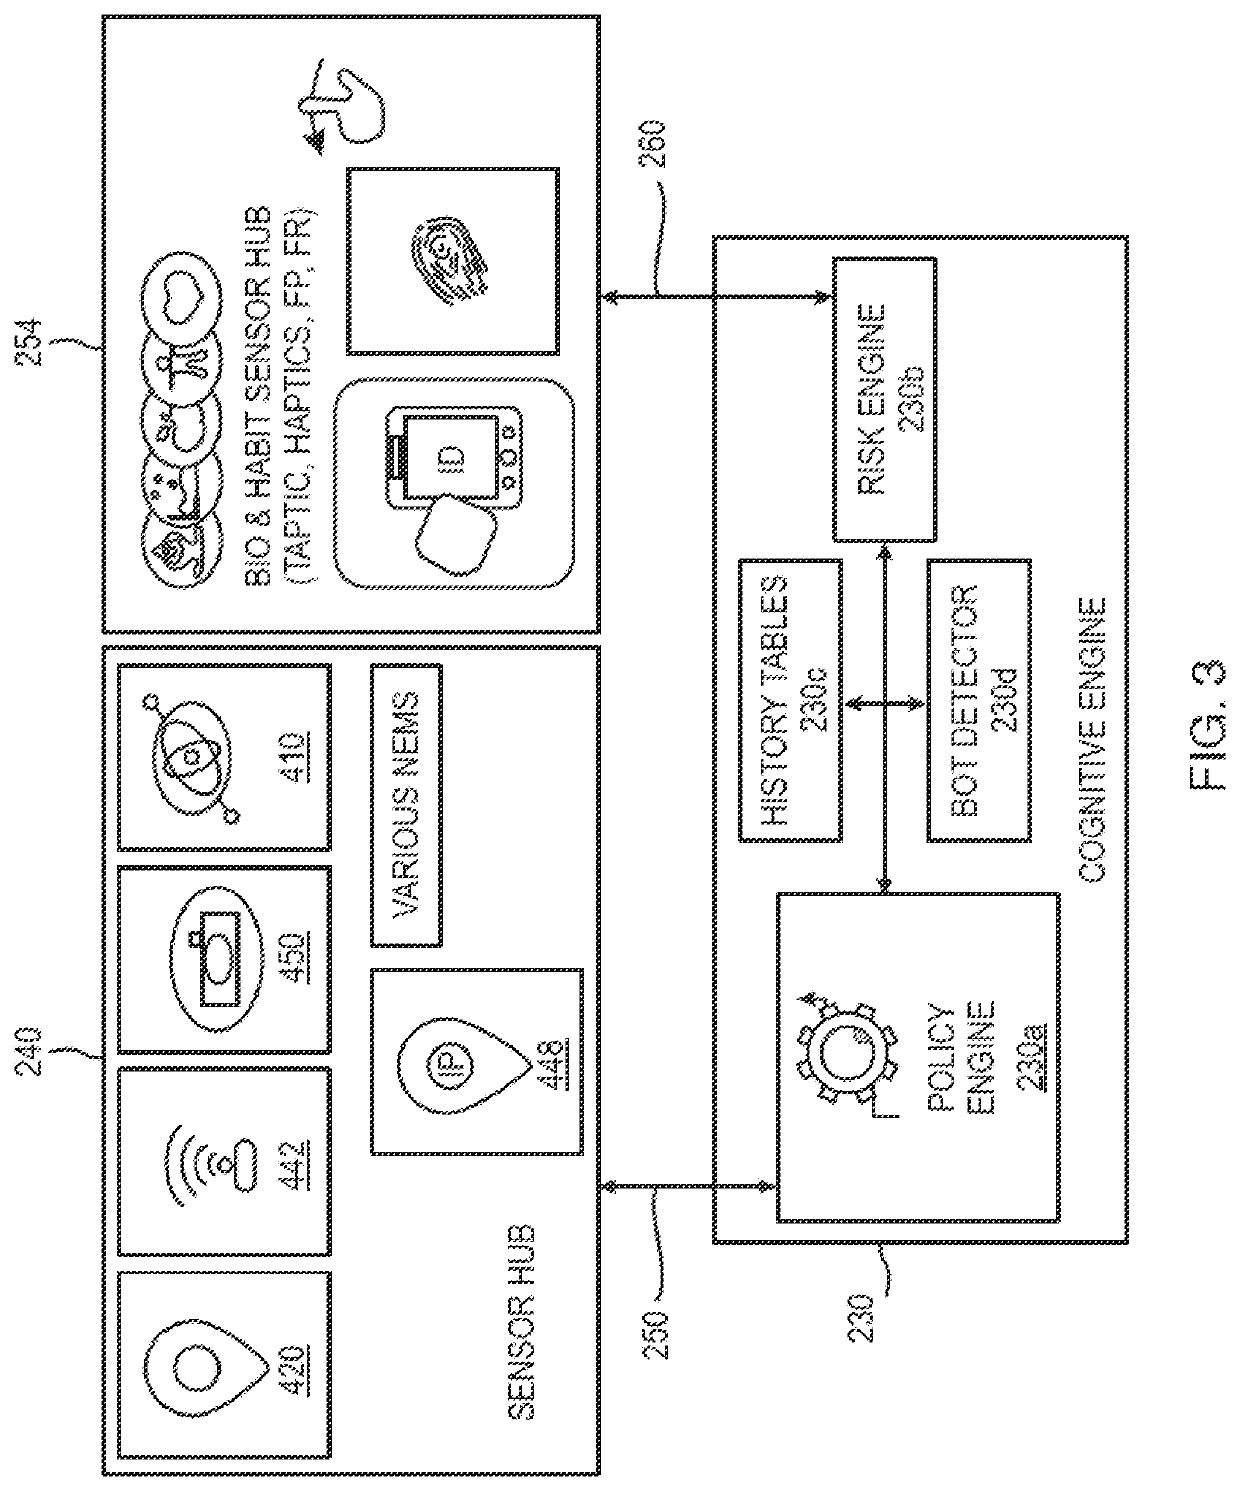 System and method to identify user and device behavior abnormalities to continuously measure transaction risk